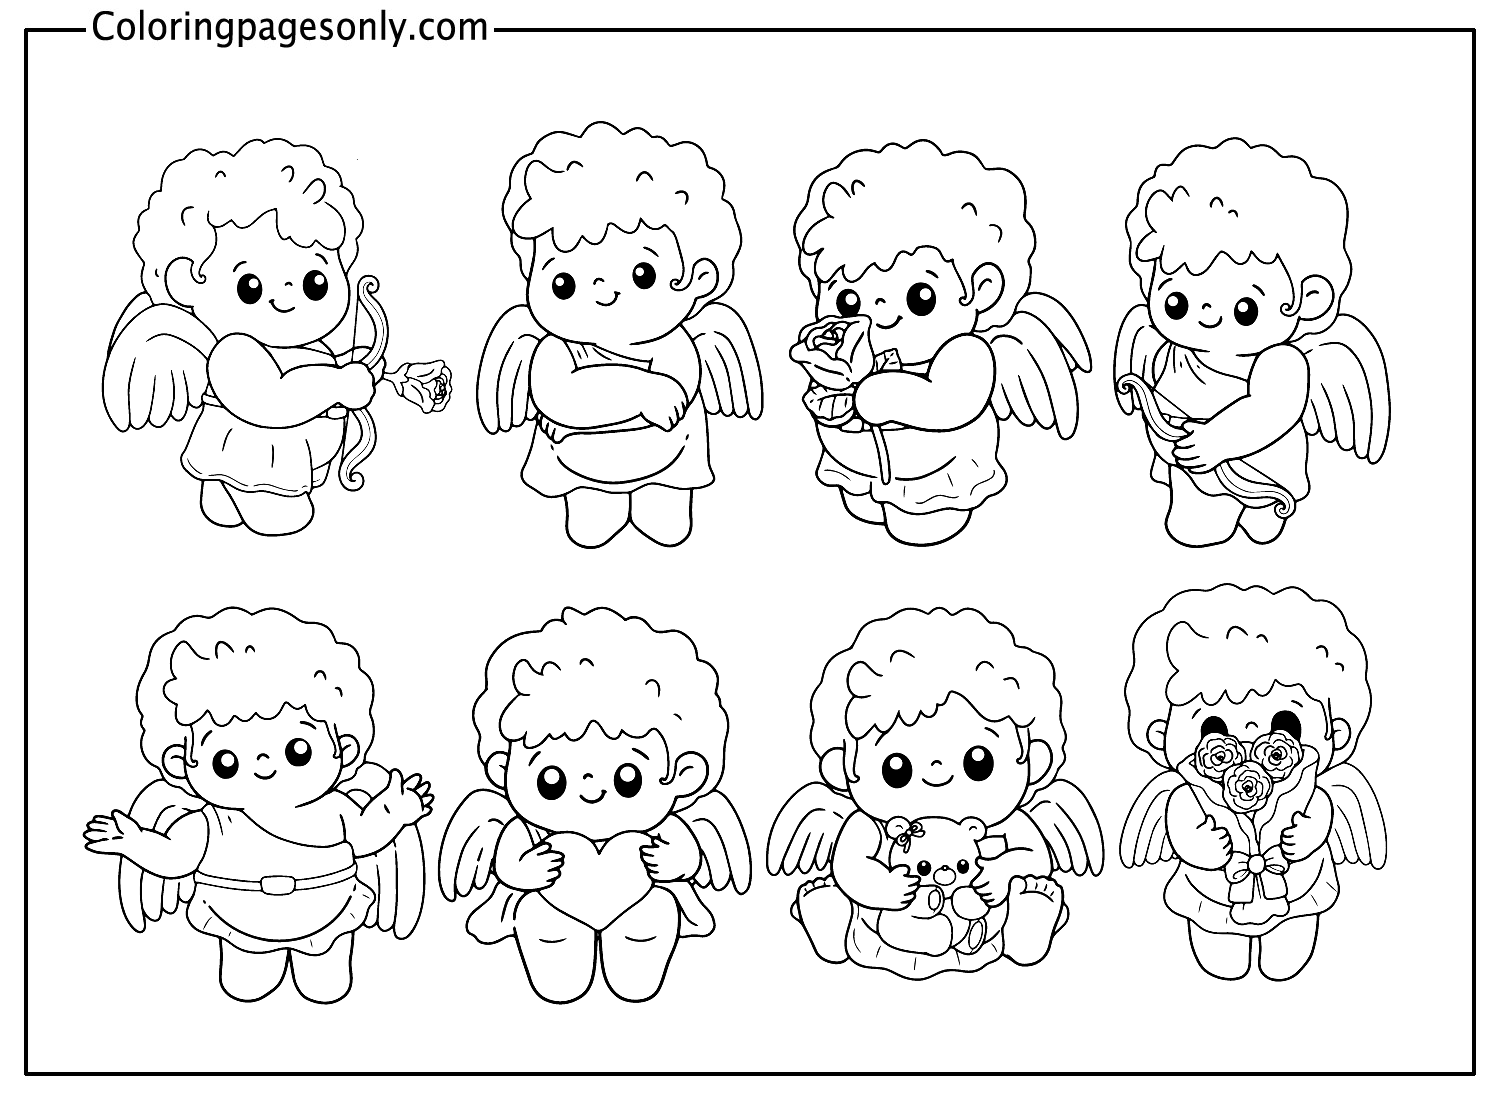 Cupid Sticker Coloring Pages